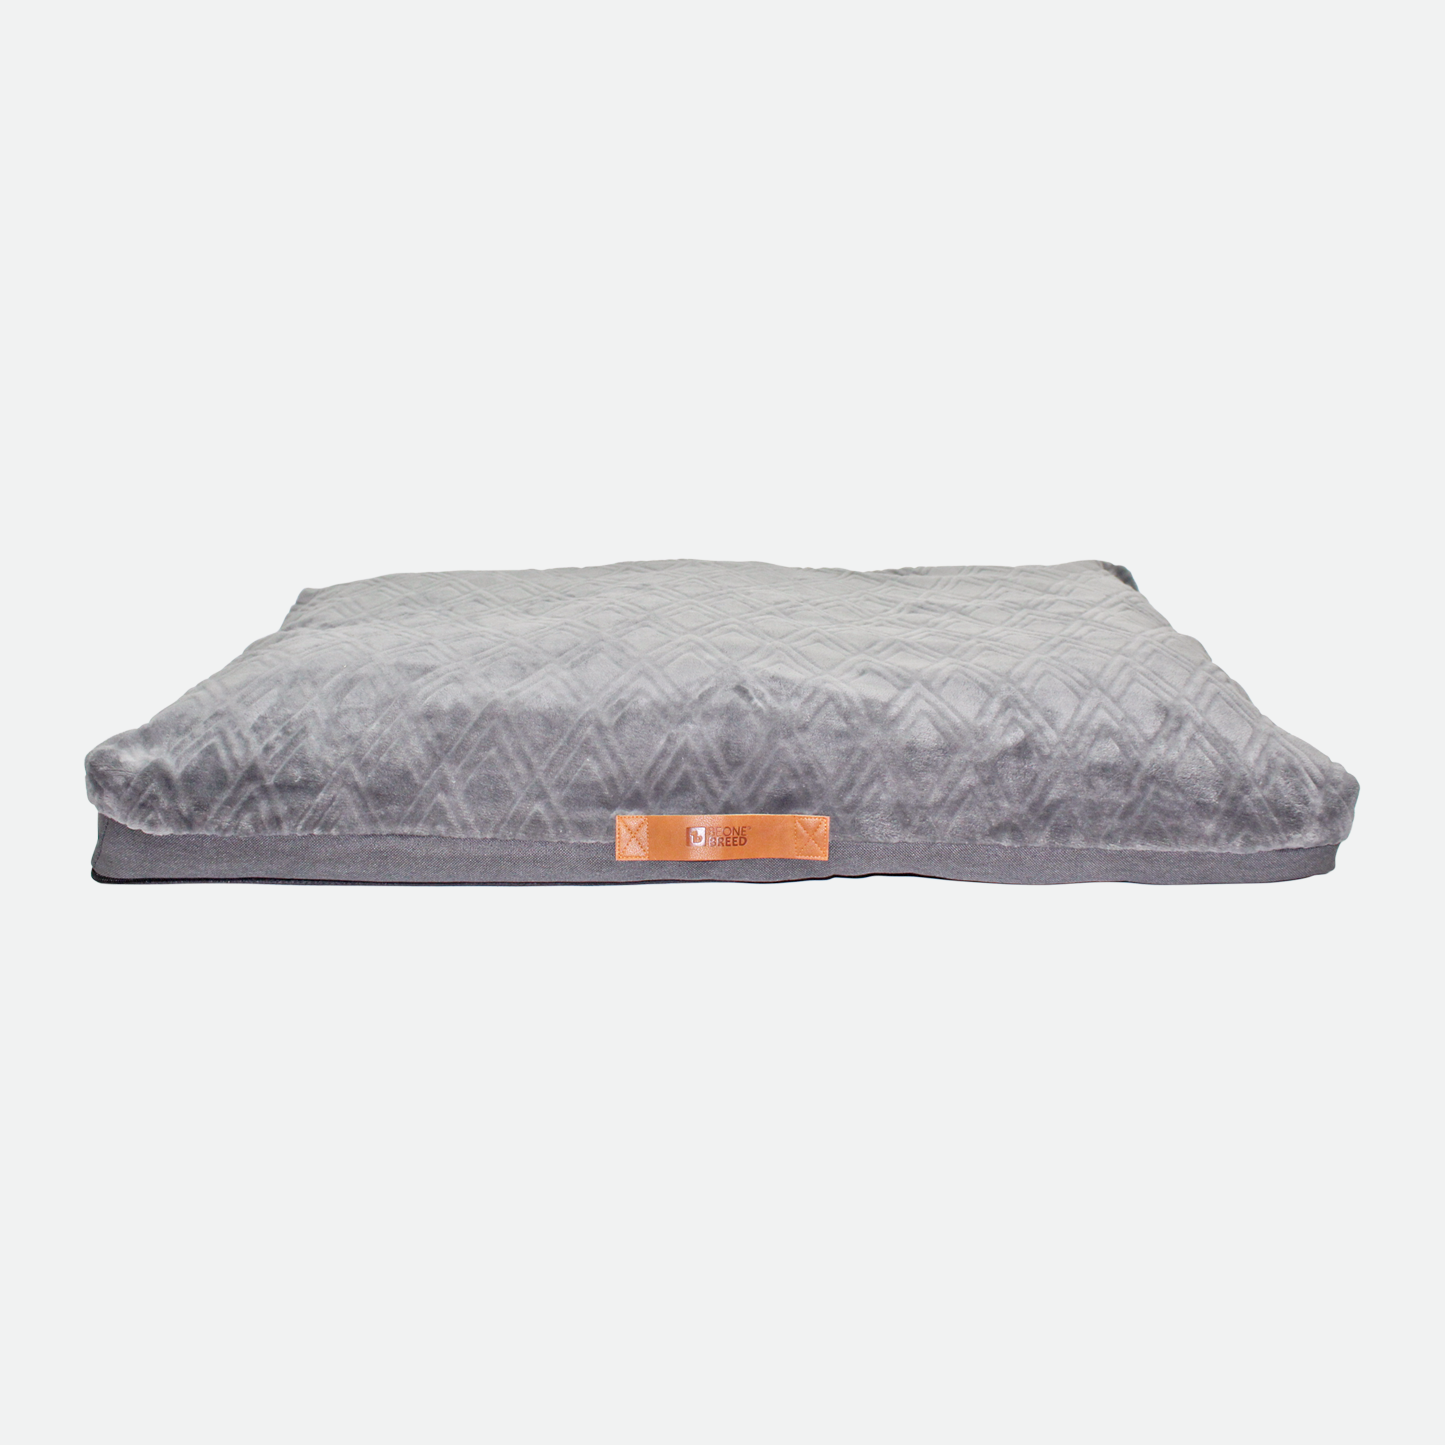 Memory foam pet bed, steal gray style